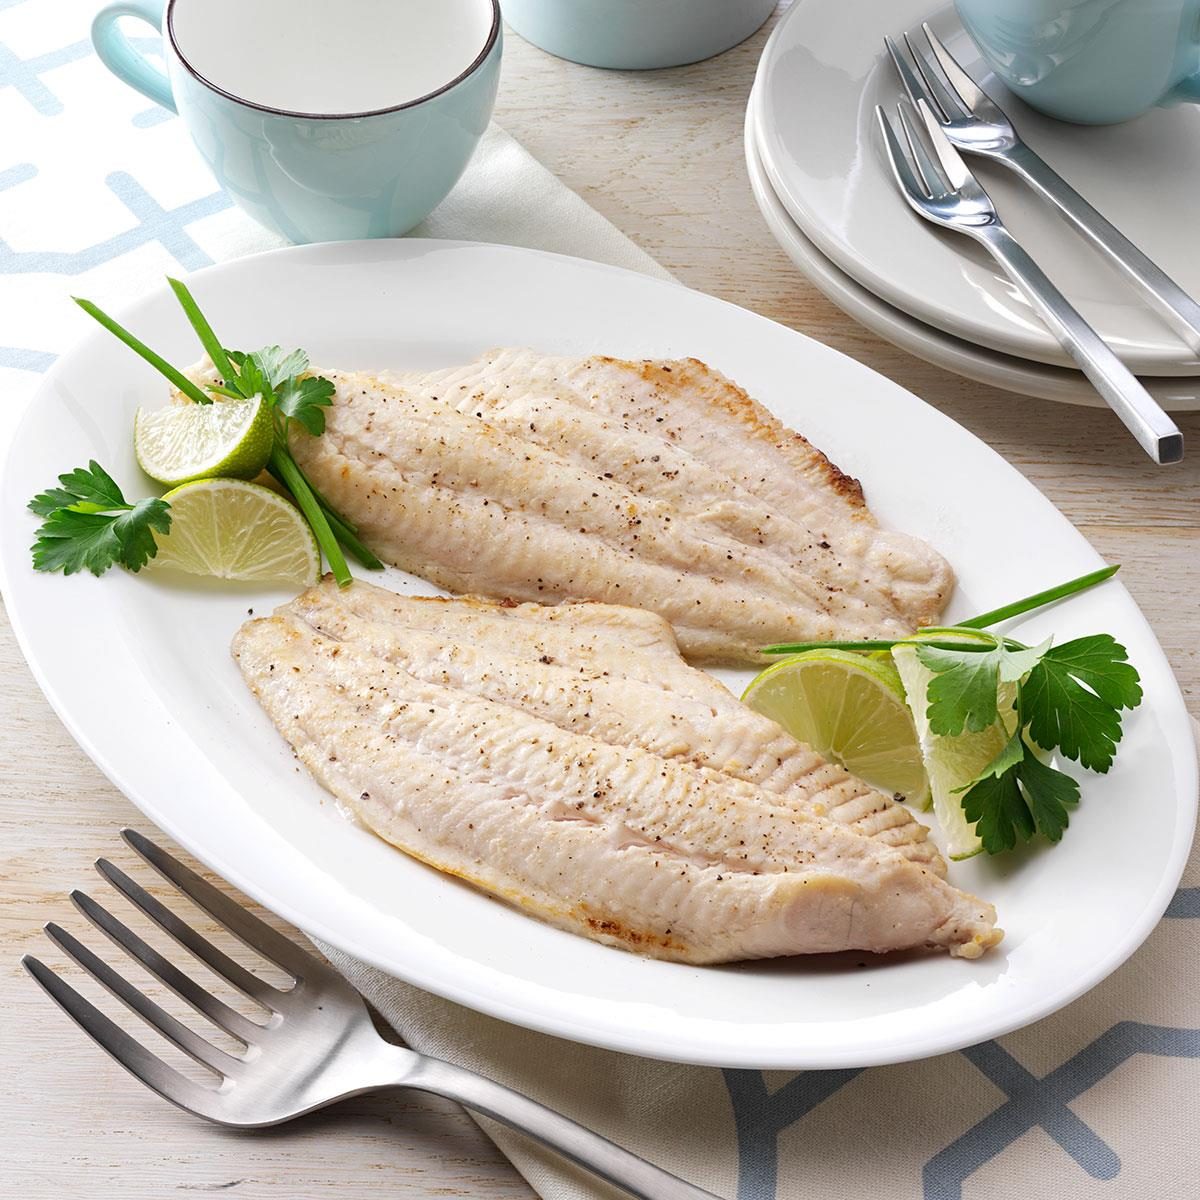 Lime Broiled Catfish